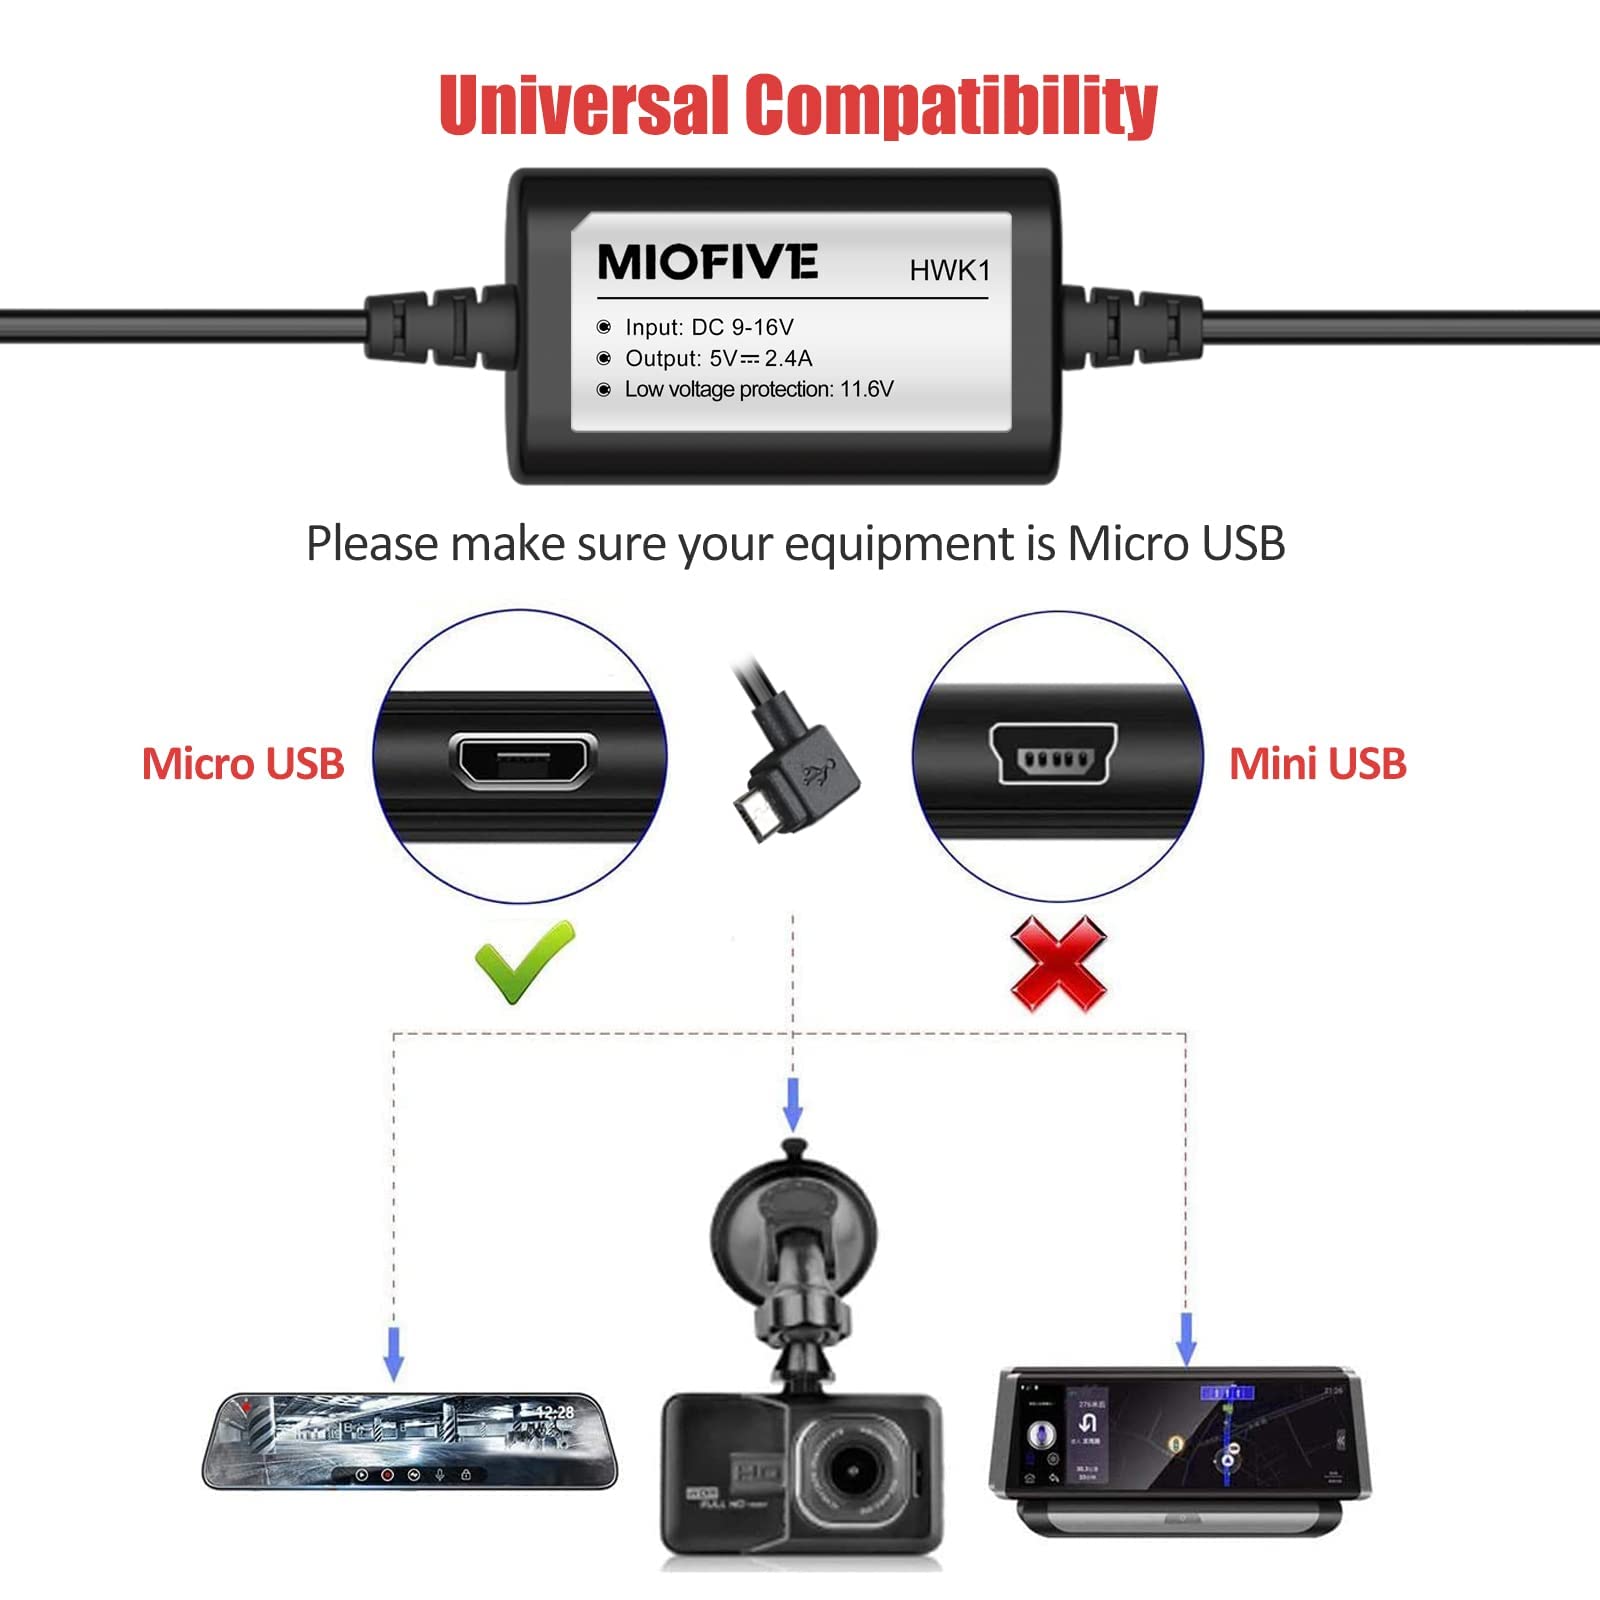 Miofive Dash Cam Hardwire Kit, 11.5ft Micro USB Hard Wire Kit for Dashcam Converts 12V-24V to 5V/2.4A w/Fuse Kit and Installation Tool, Enables Parking Mode, Low Voltage Protection for Dash Cameras